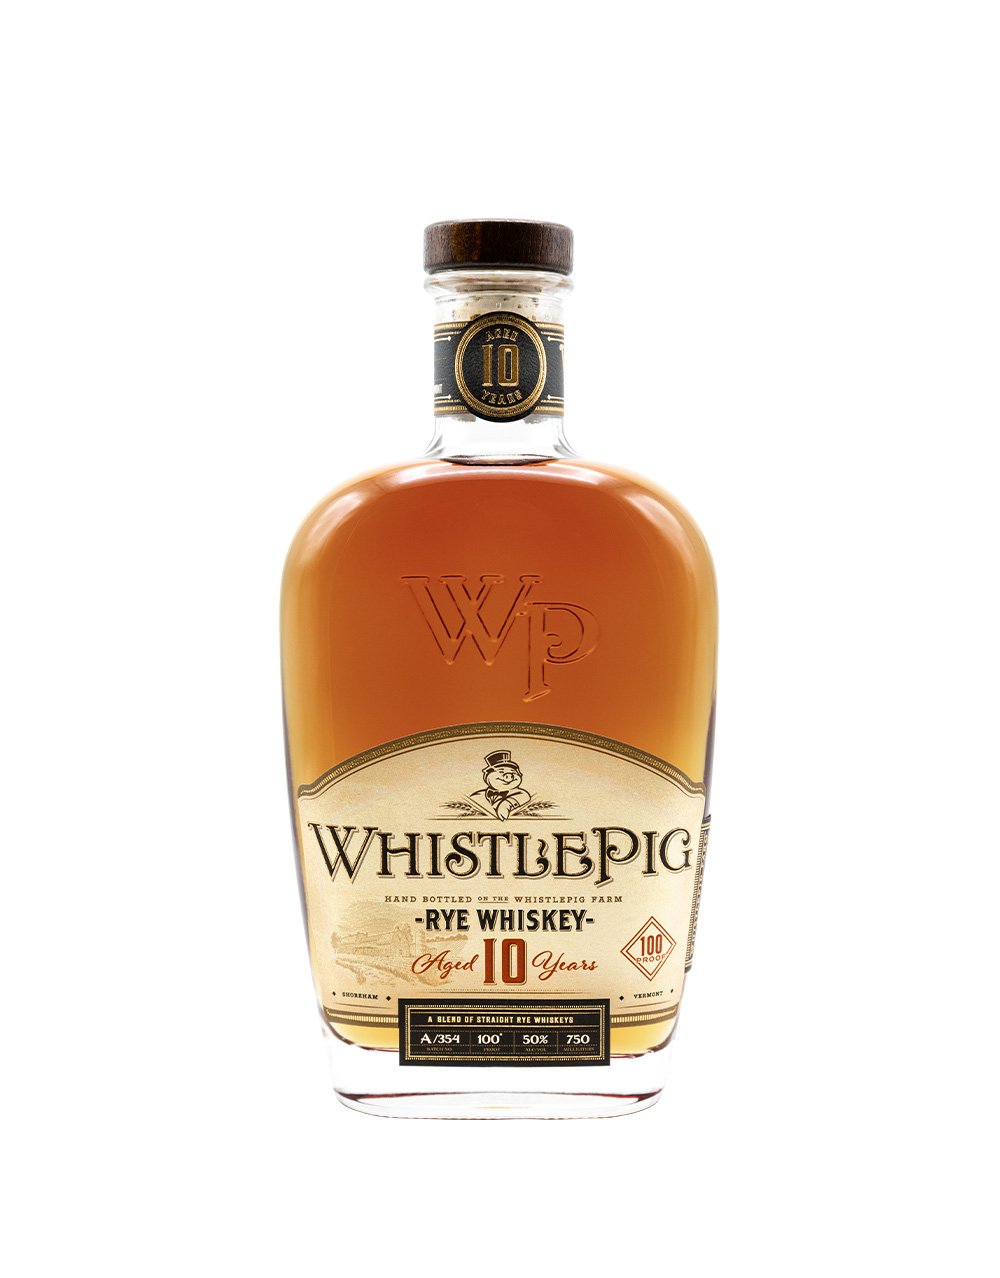 Buy WhistlePig 10 Years 100 Proof Rye Whiskey - epicurious (Powered by ...